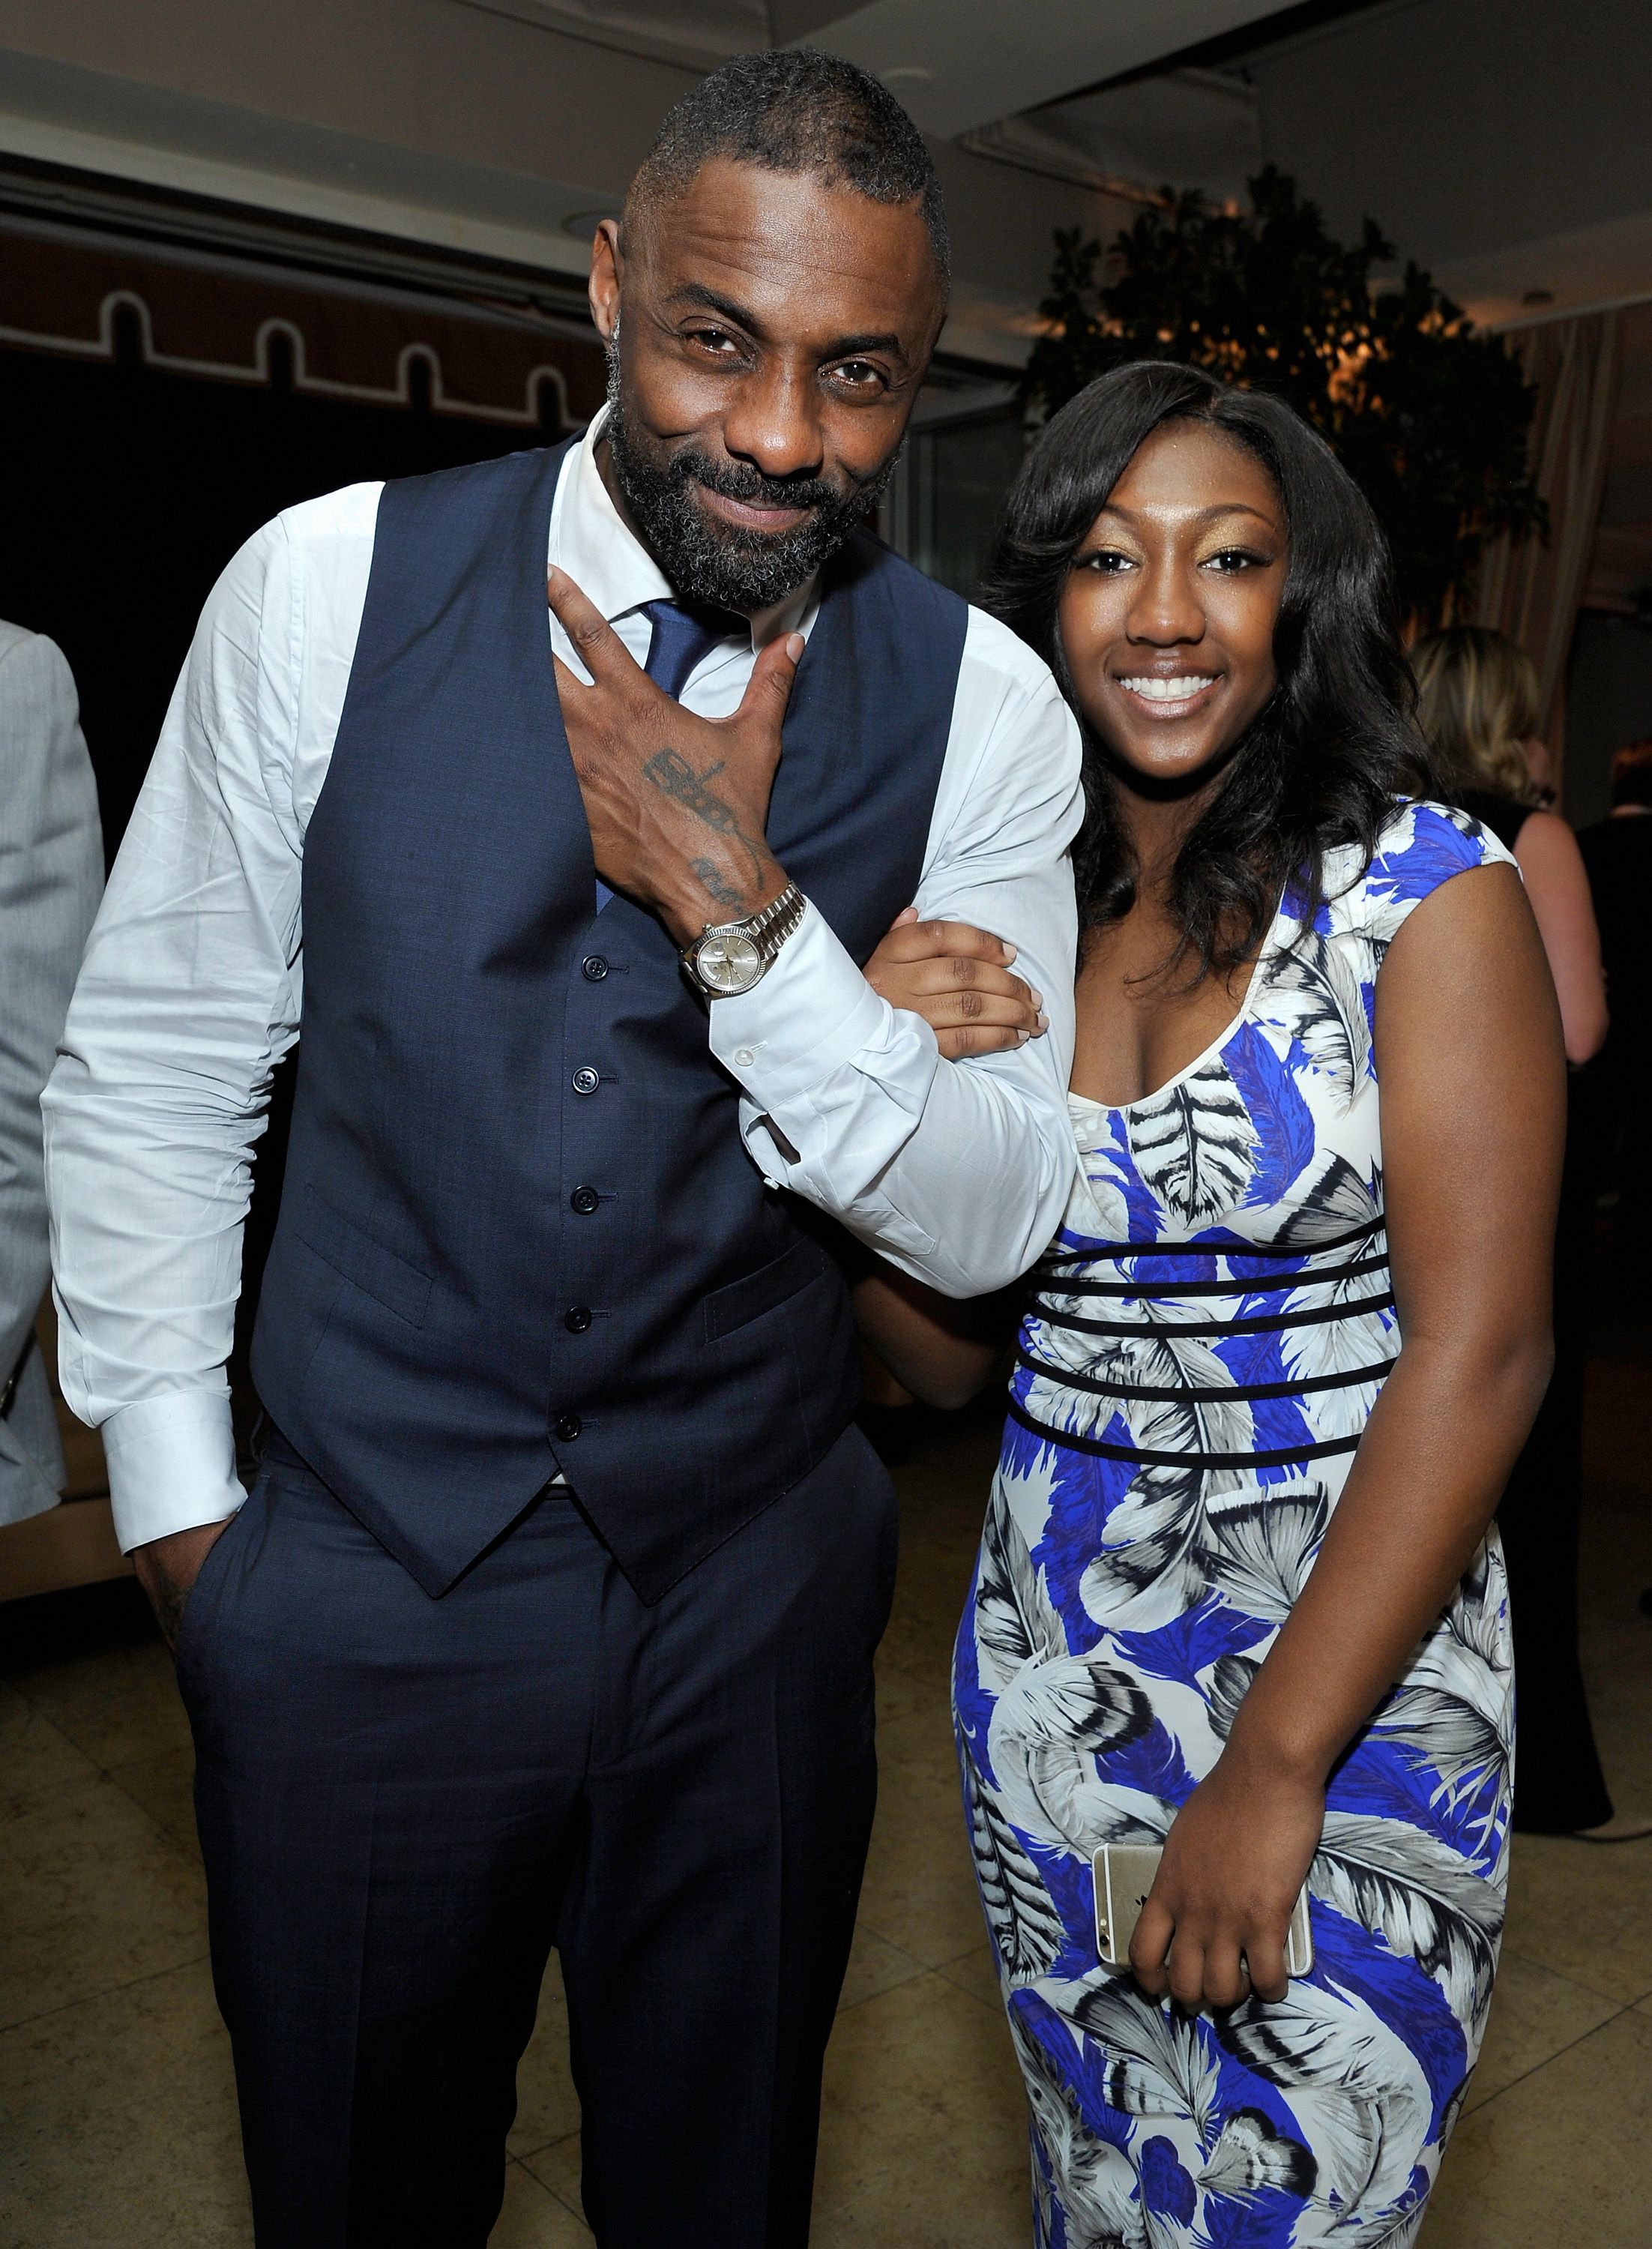 Actor Idris Elba and daughter Isan Elba attend the Weinstein Company & Netflix's 2016 SAG after-party hosted by Absolut Elyx at Sunset Tower on January 30, 2016 | Photo: Getty Images